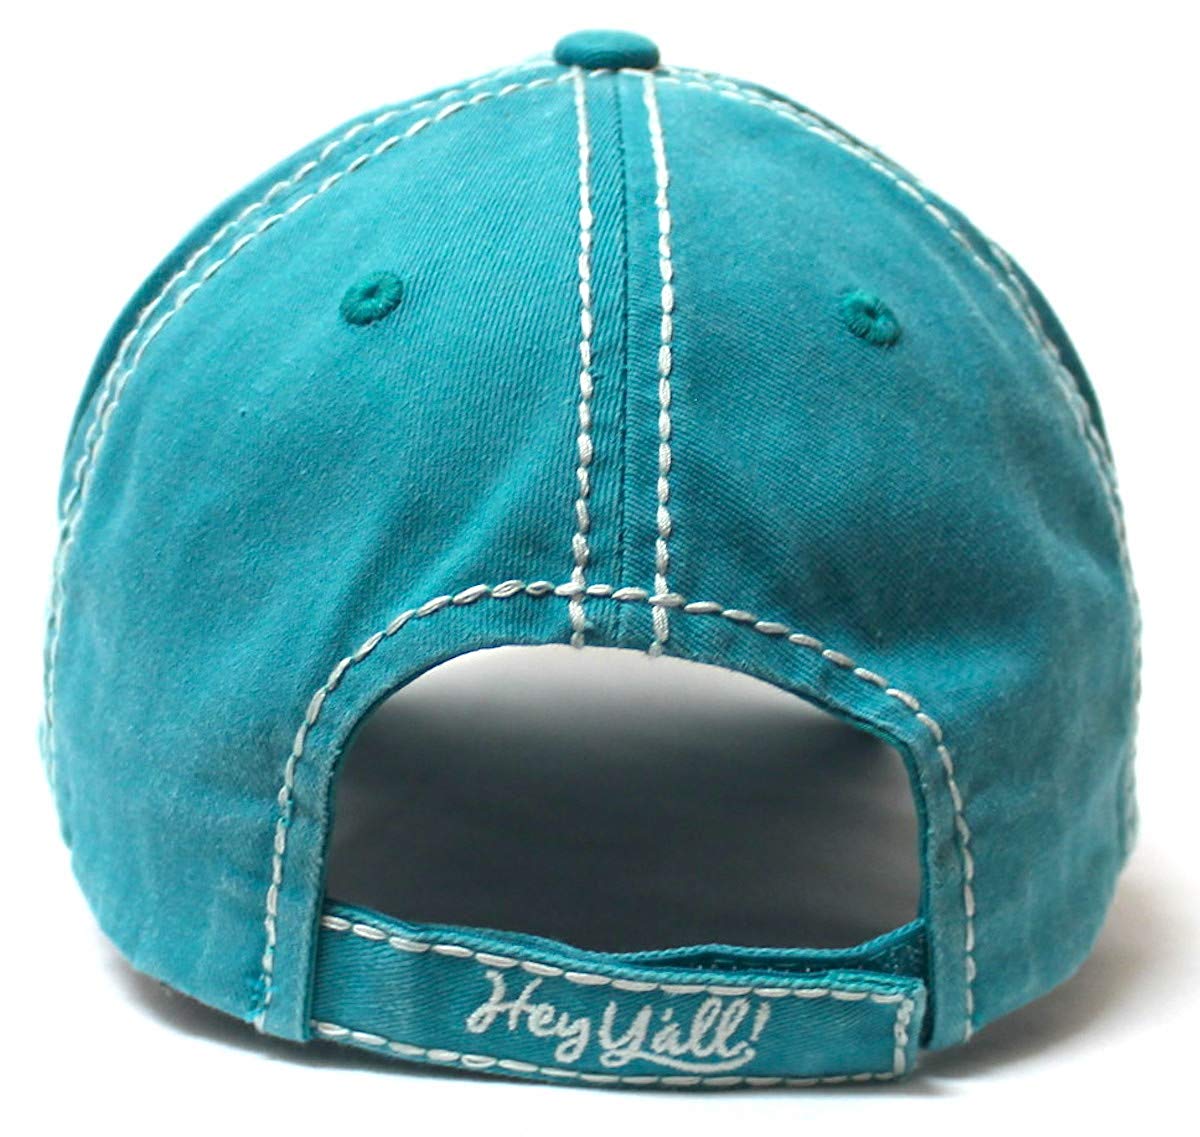 Women's Summer Ballcap Hey Y'all! Wildflower Embroidery Hat, Turquoise - Caps 'N Vintage 